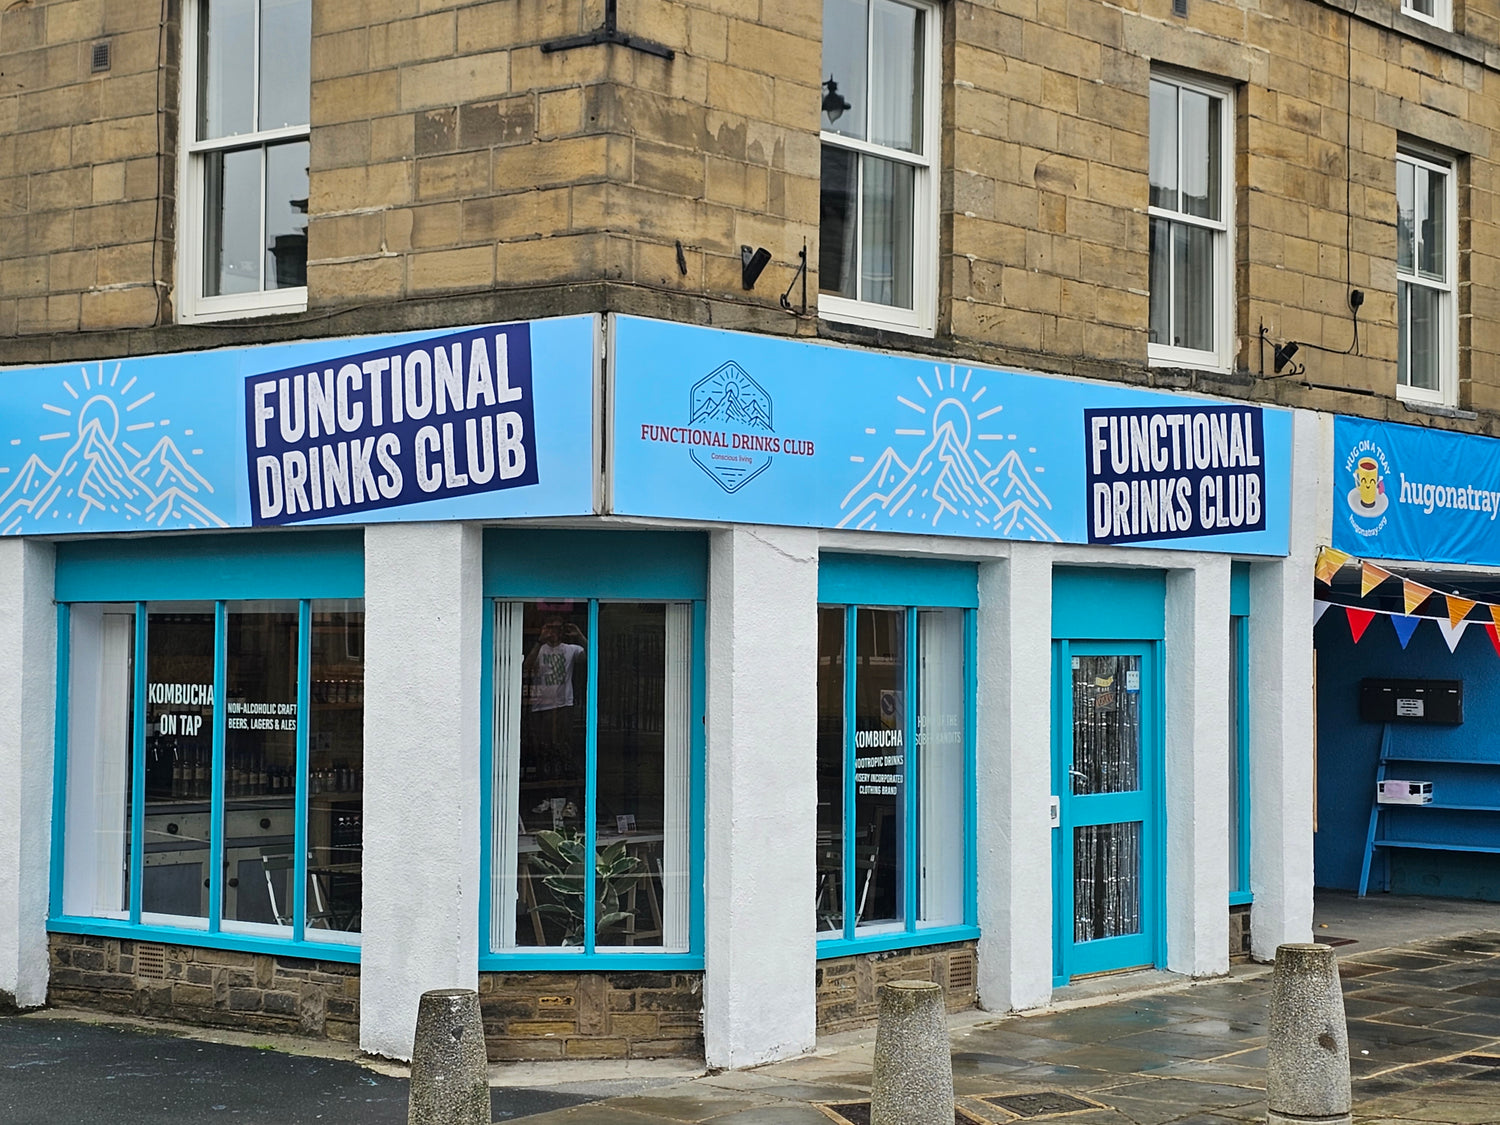 Outside of Functional Drinks Club in Otley